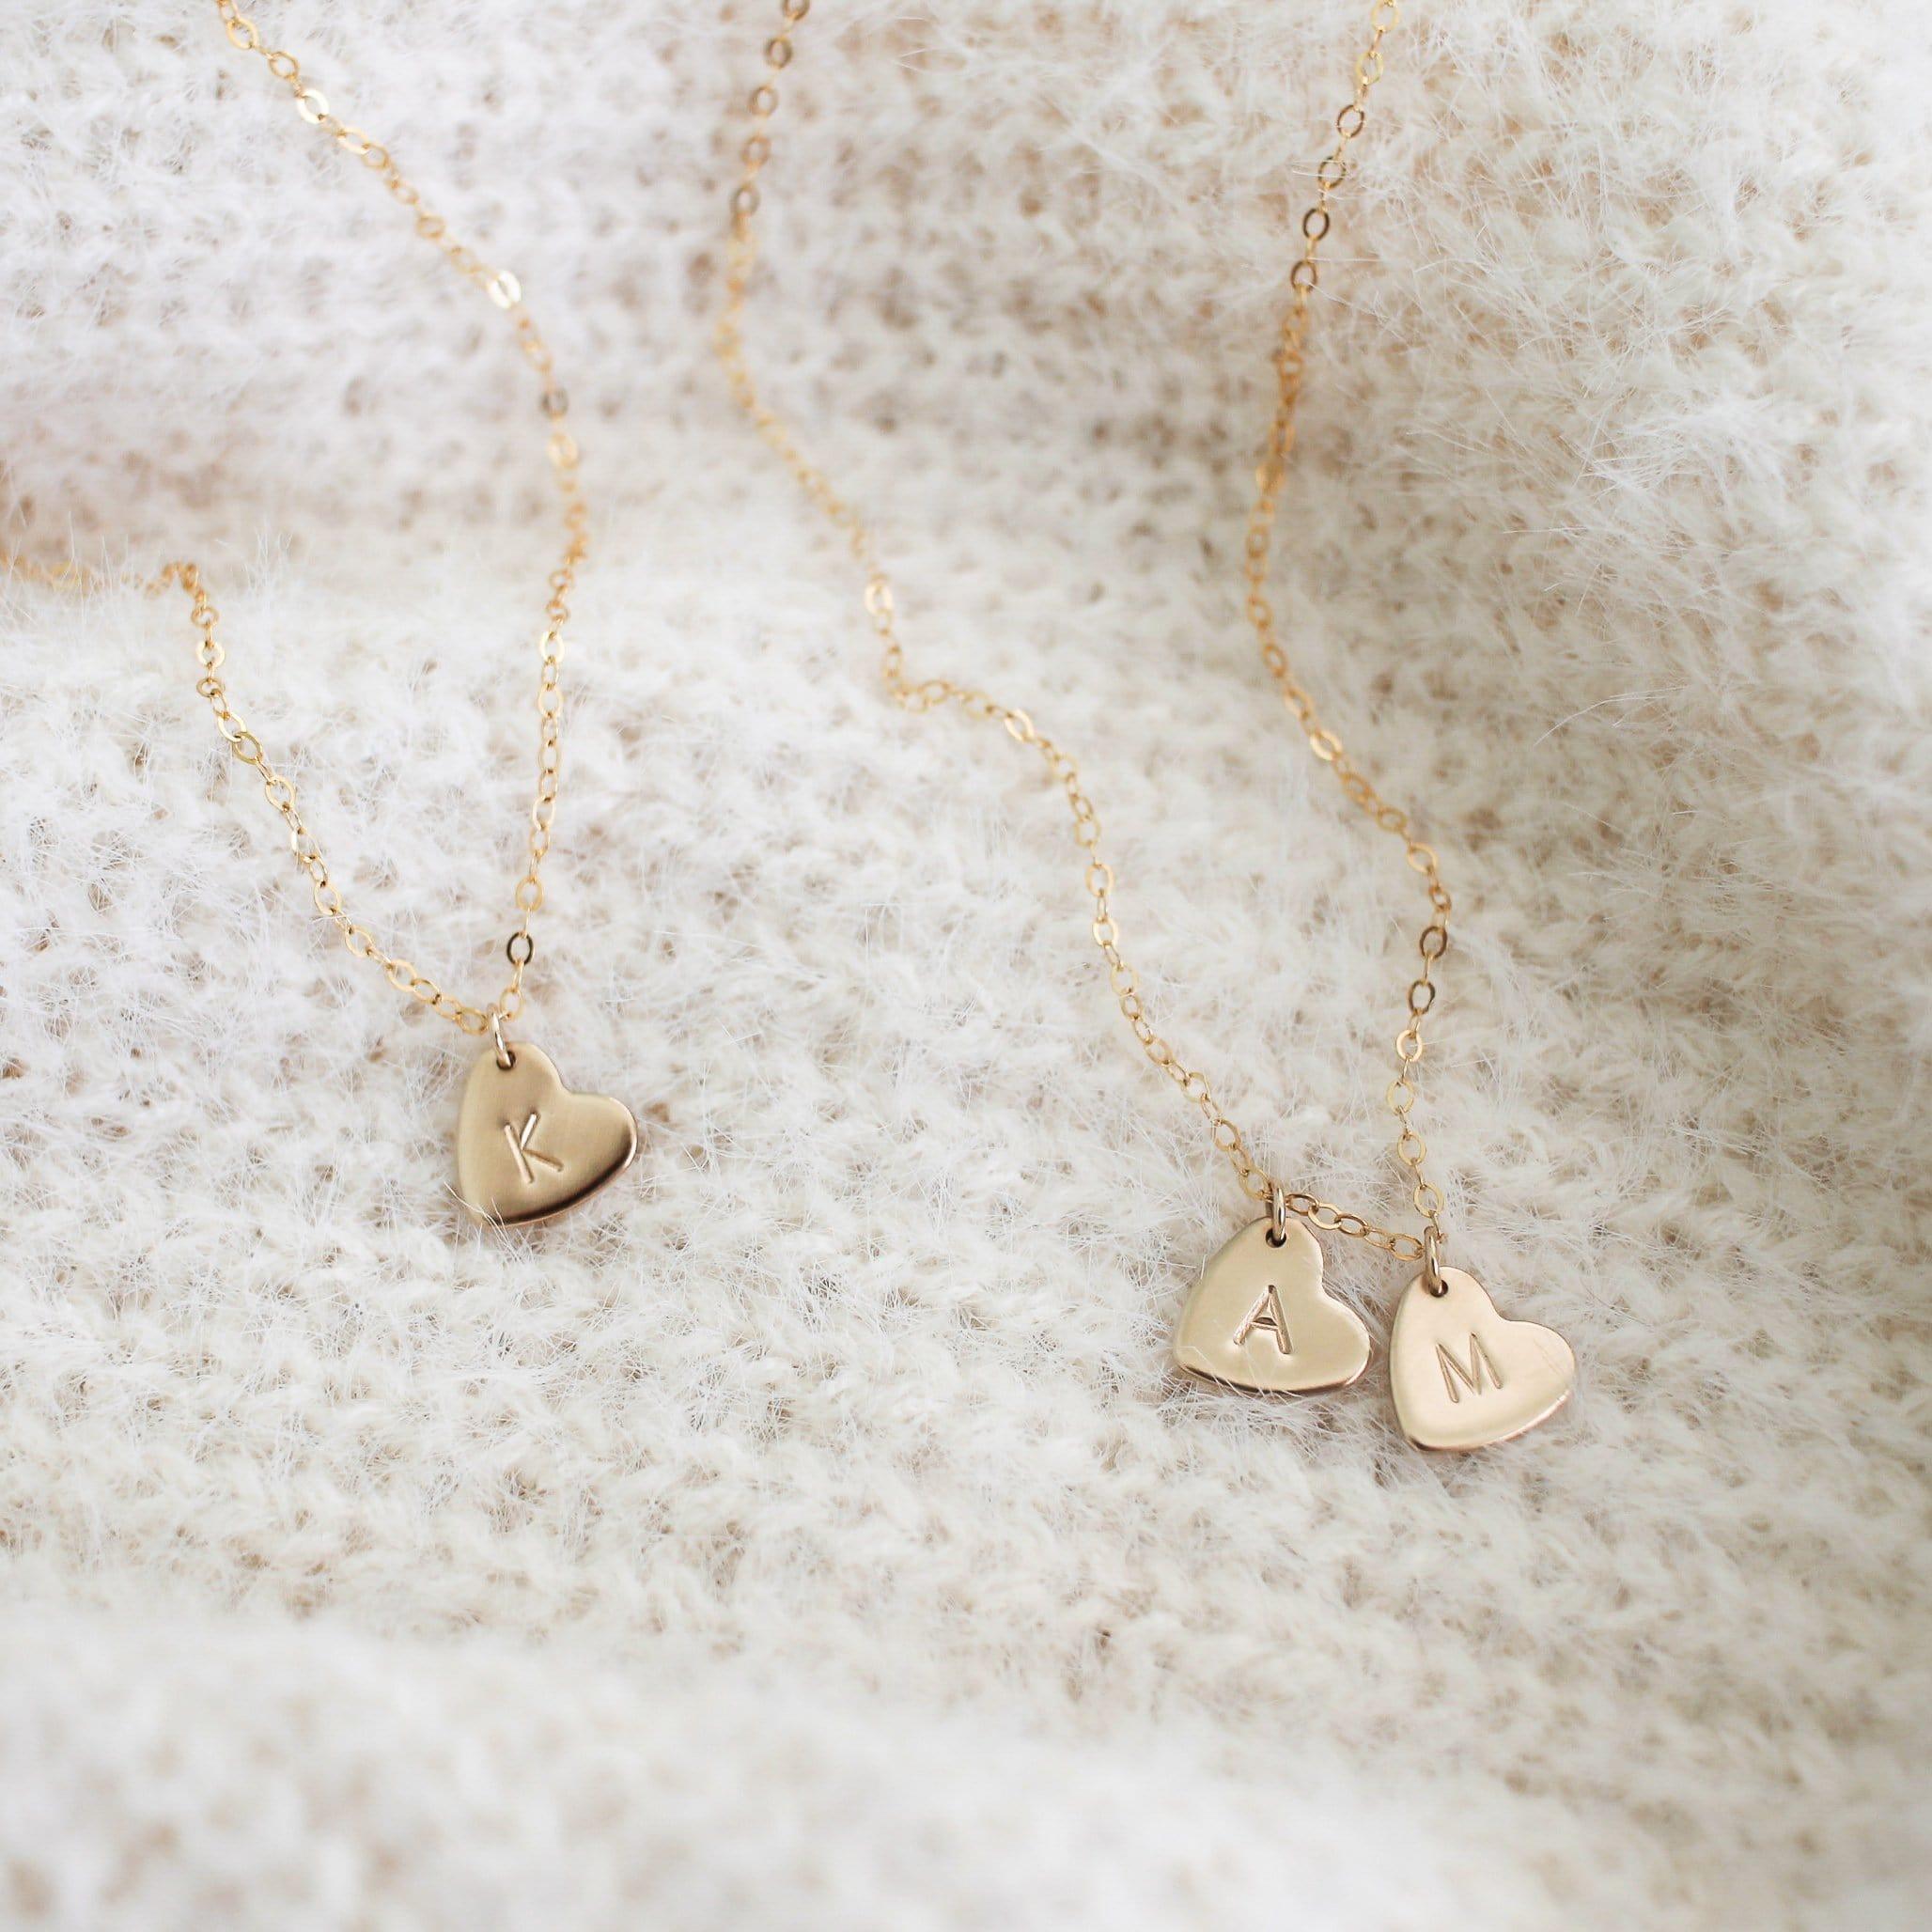 Fiona Heart Necklace - Nolia Jewelry - Meaningful + Sustainably Handcrafted Jewelry